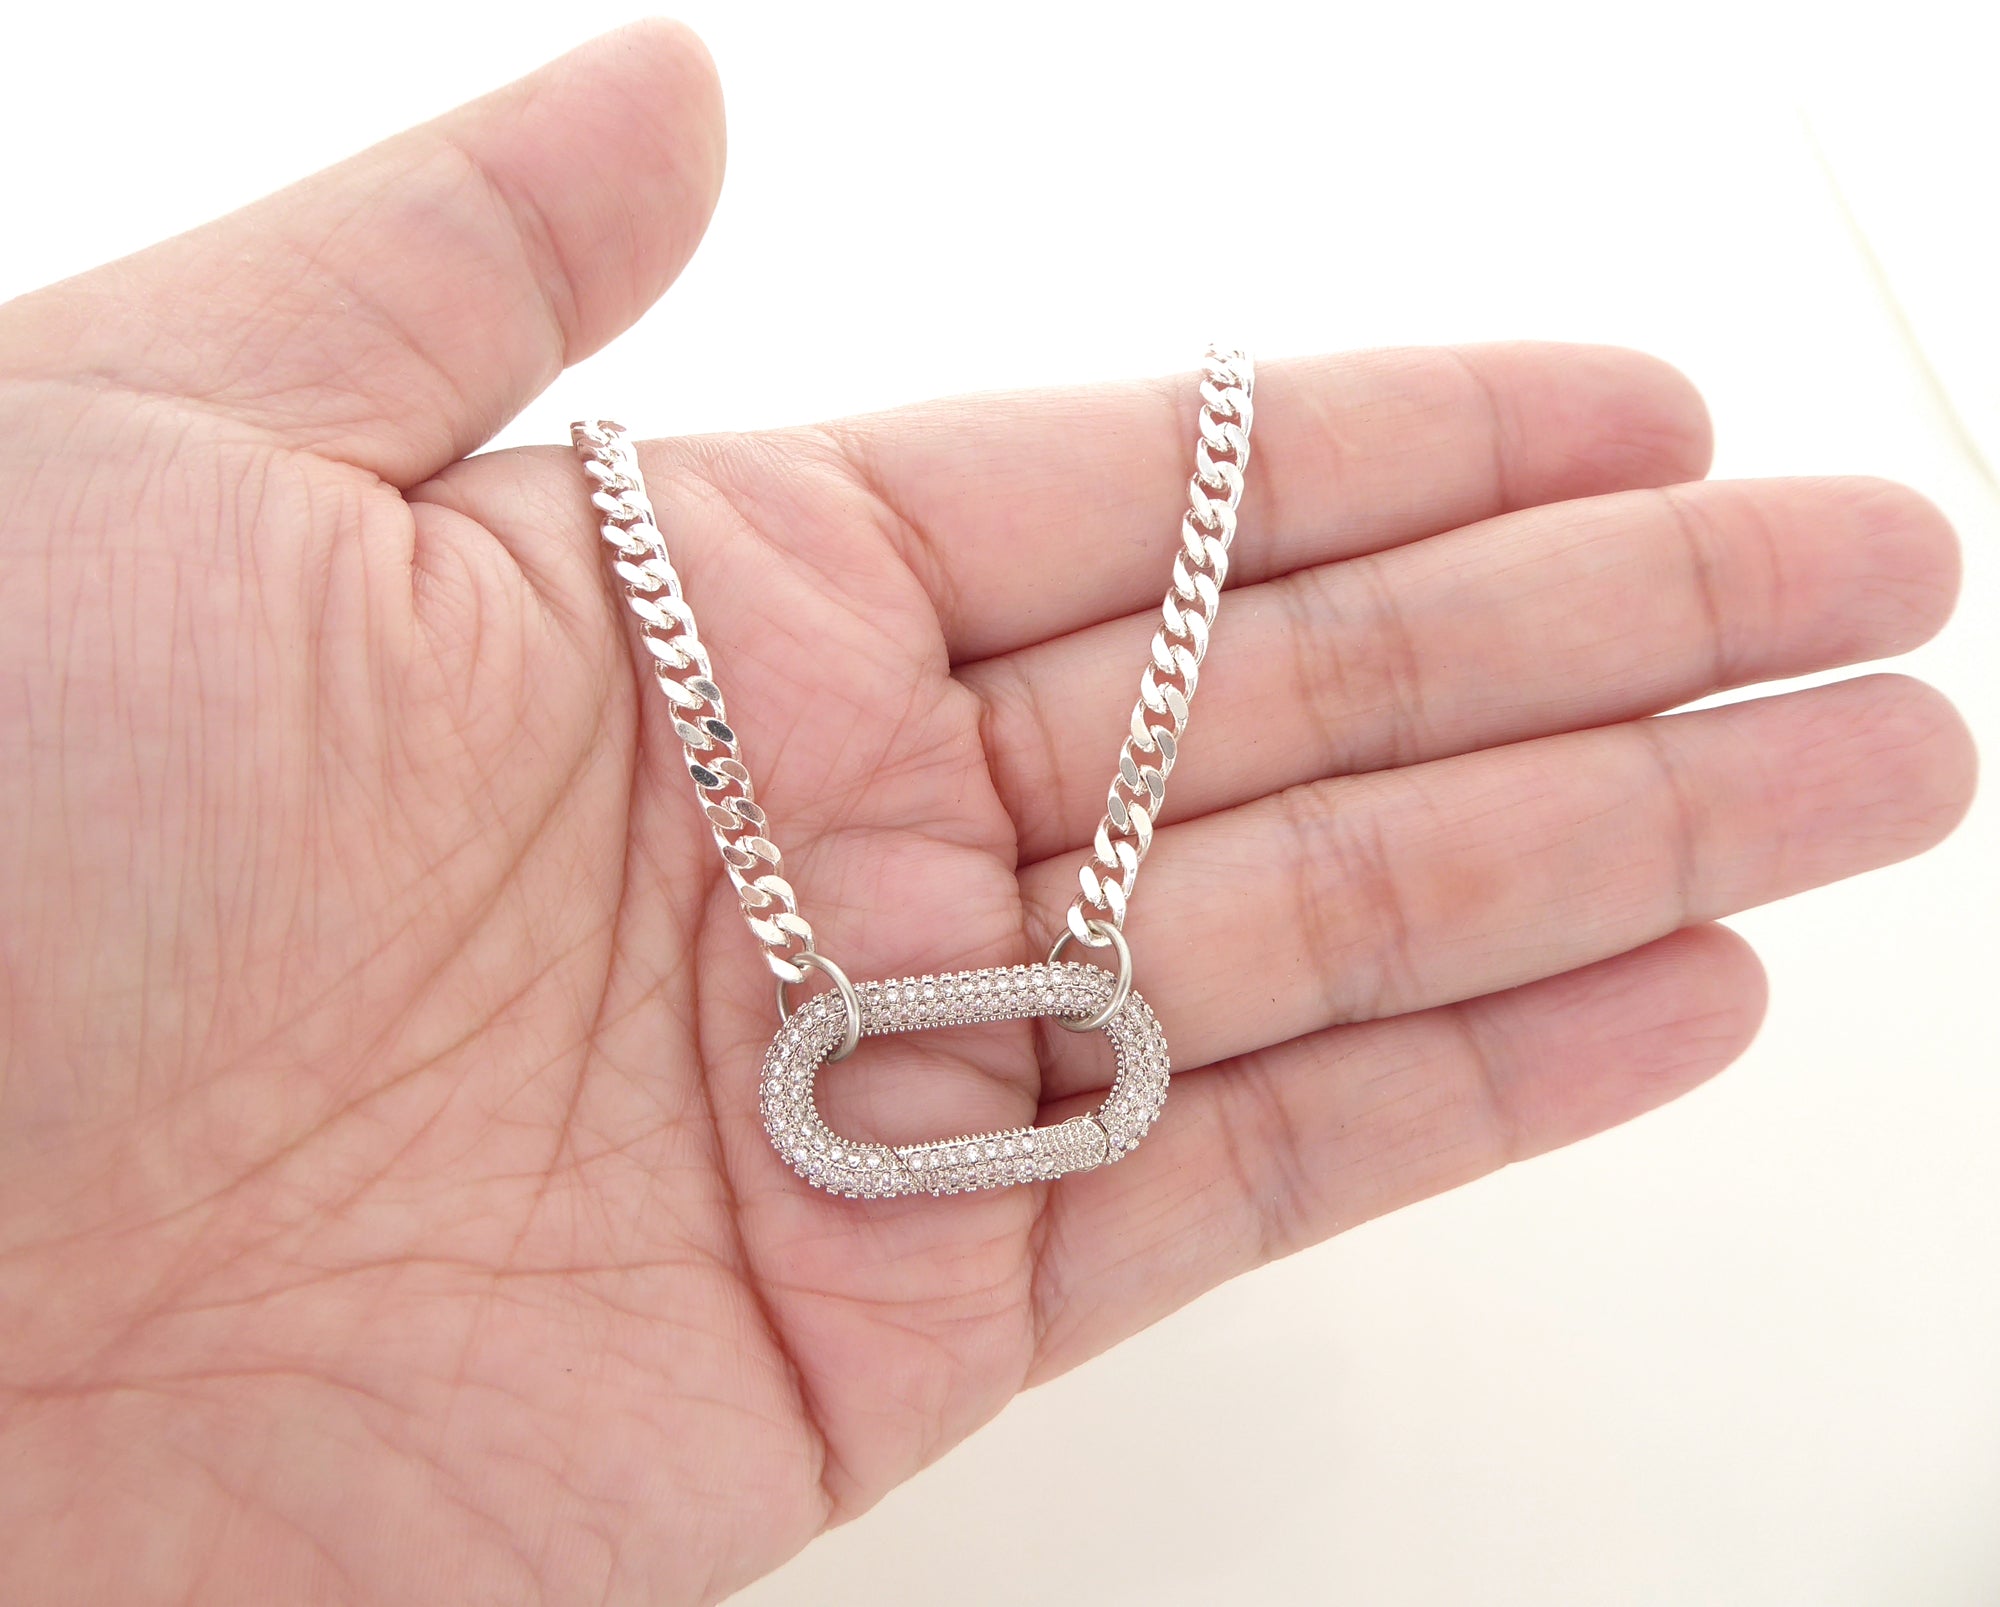 Silver rhinestone carabiner clasp necklace by Jenny Dayco 6